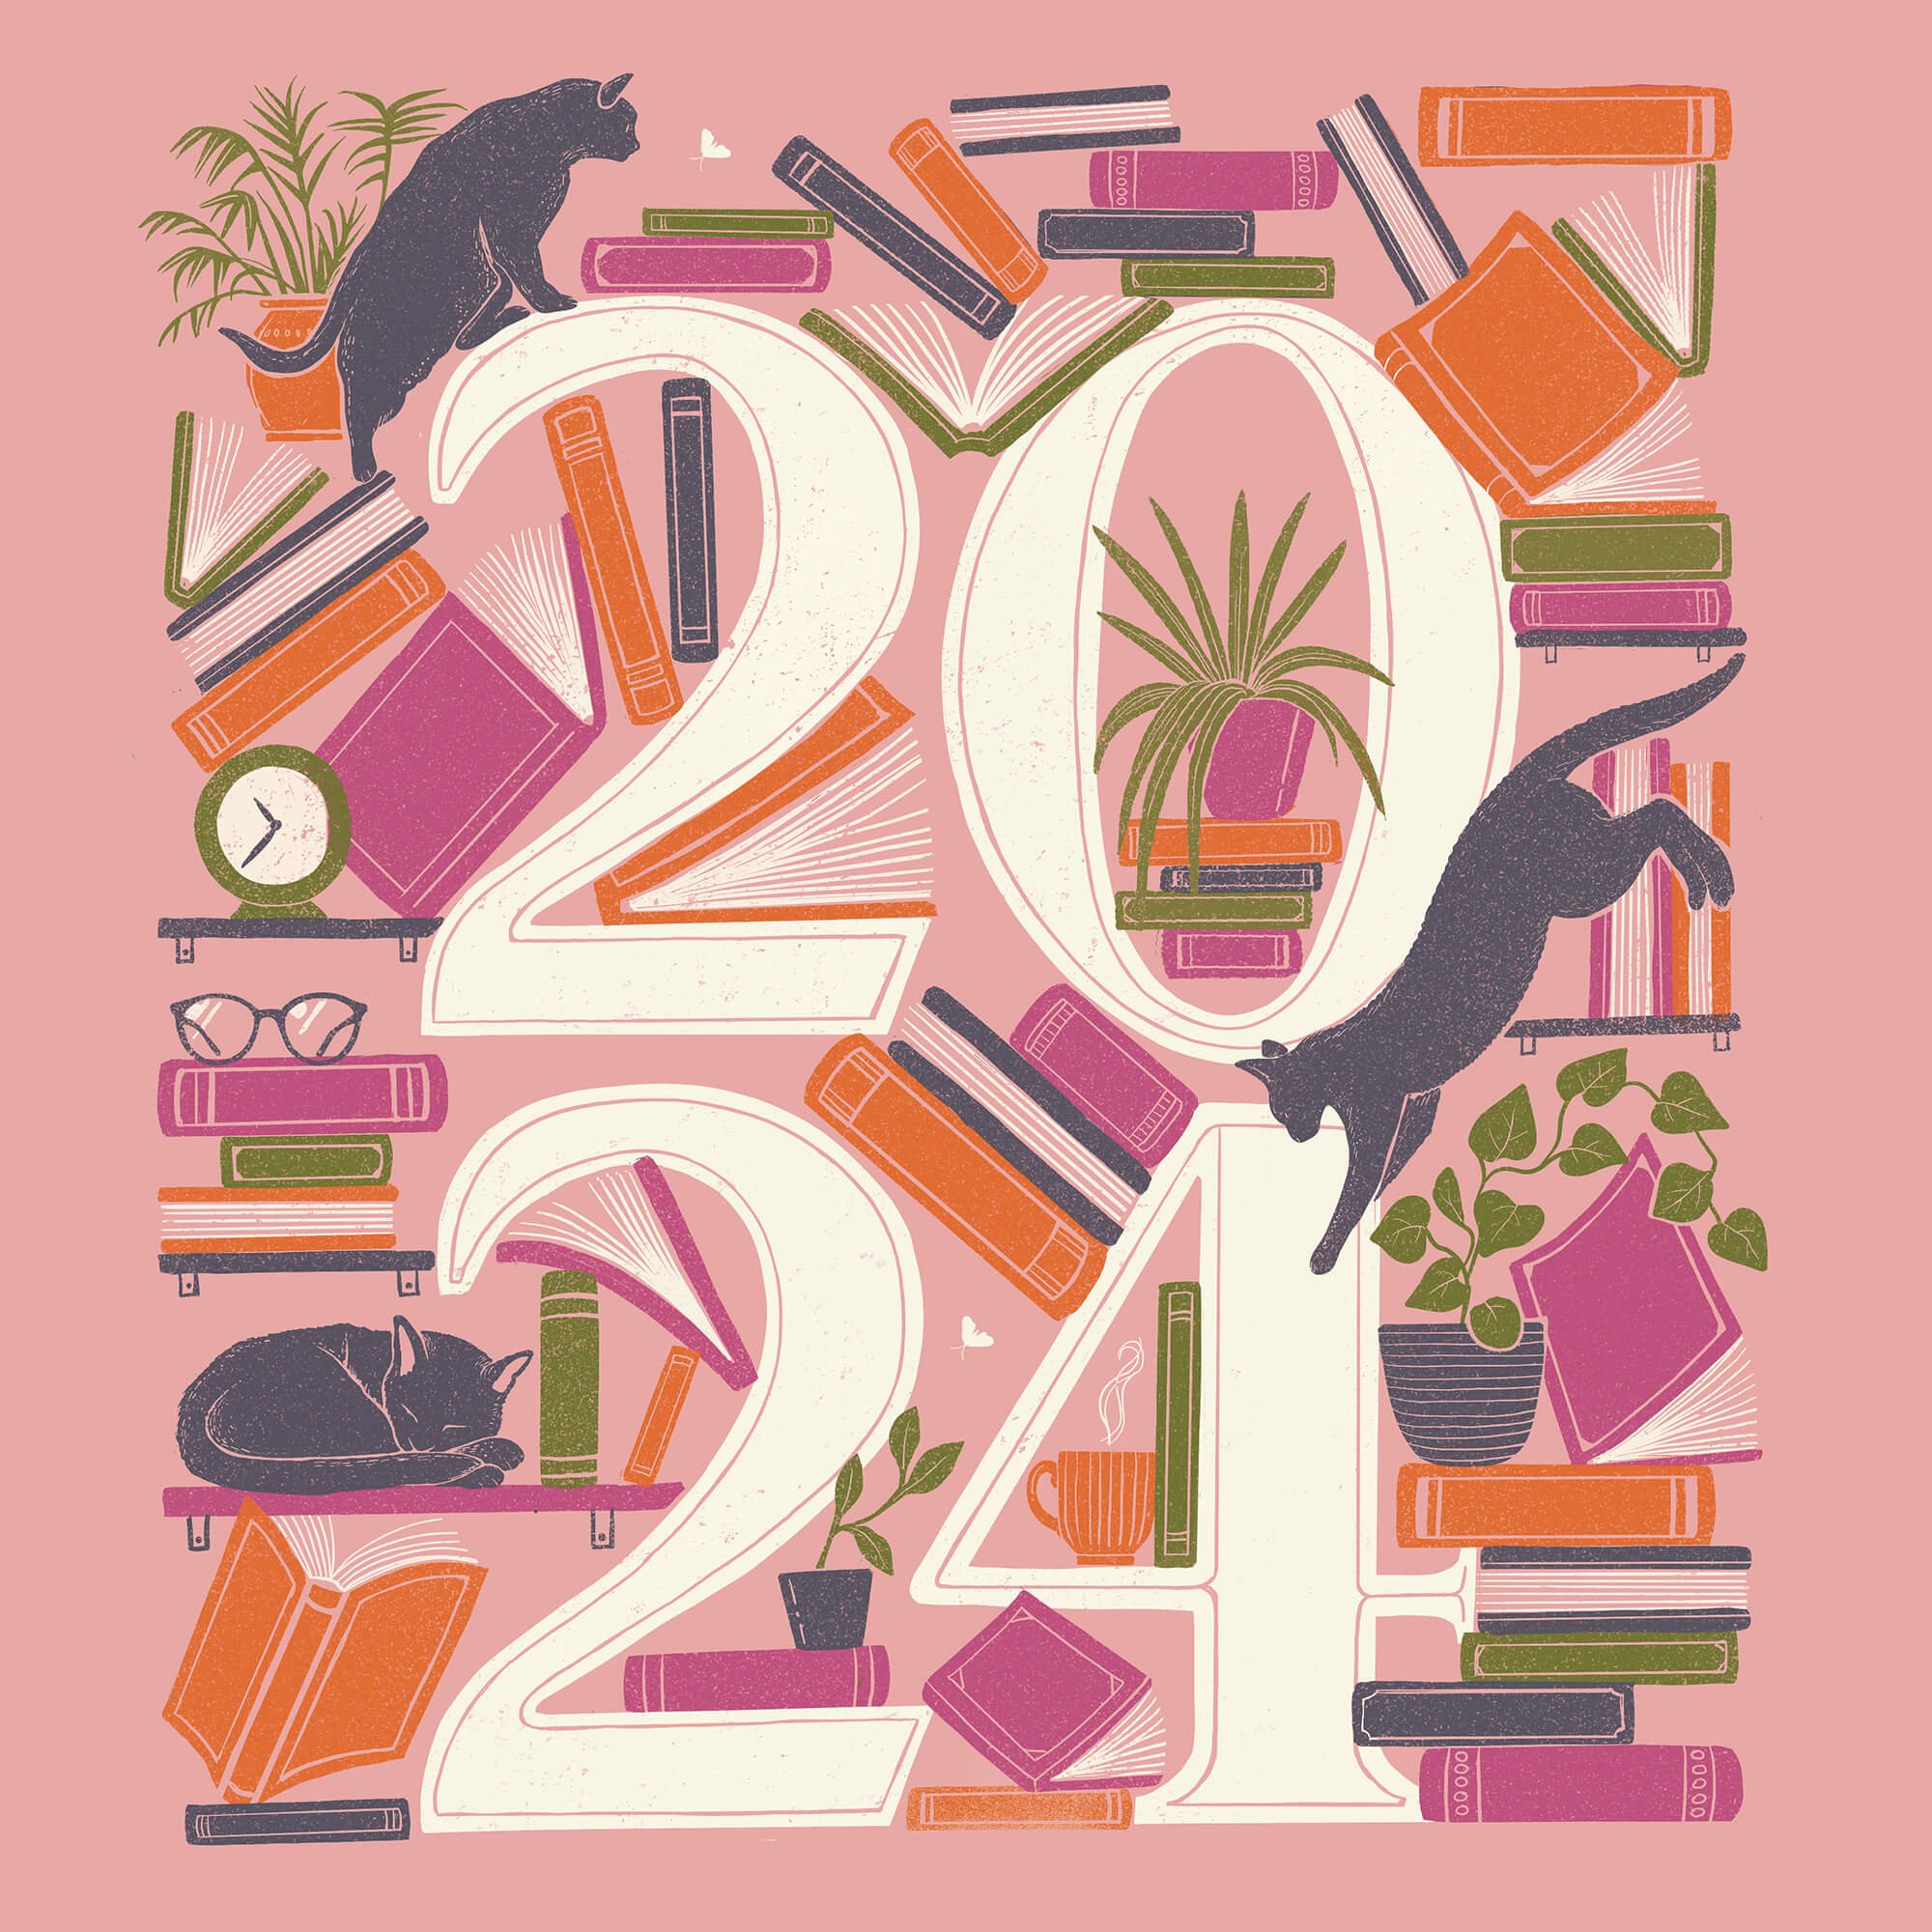  Editorial illustration created for The Guardian. The illustration incorporates hand-drawn lettering of numbers for the year ‘2024’. and illustrations in pinks oranges and greens, with a printed texture and features cats, plants and books. 